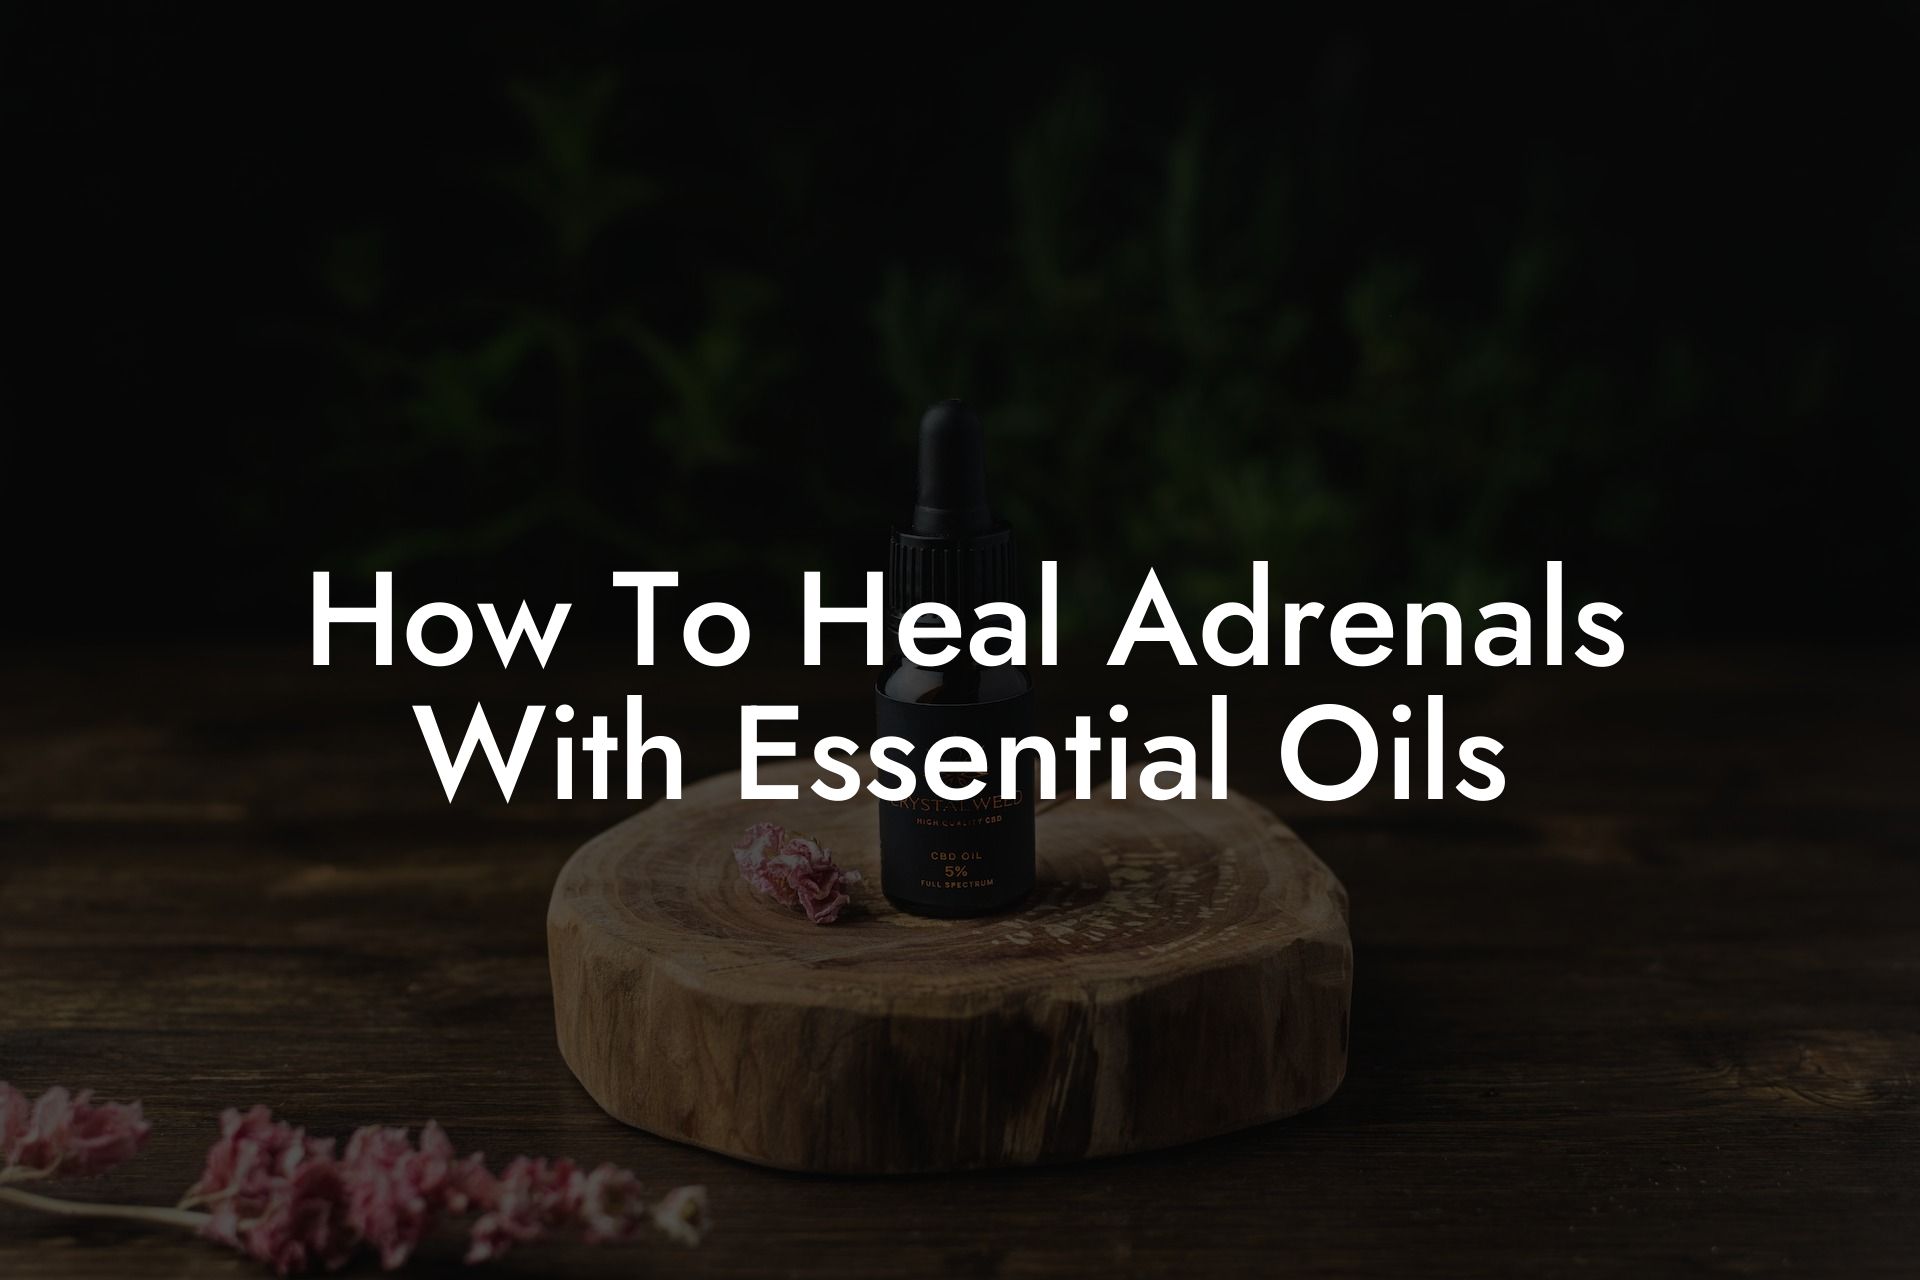 How To Heal Adrenals With Essential Oils